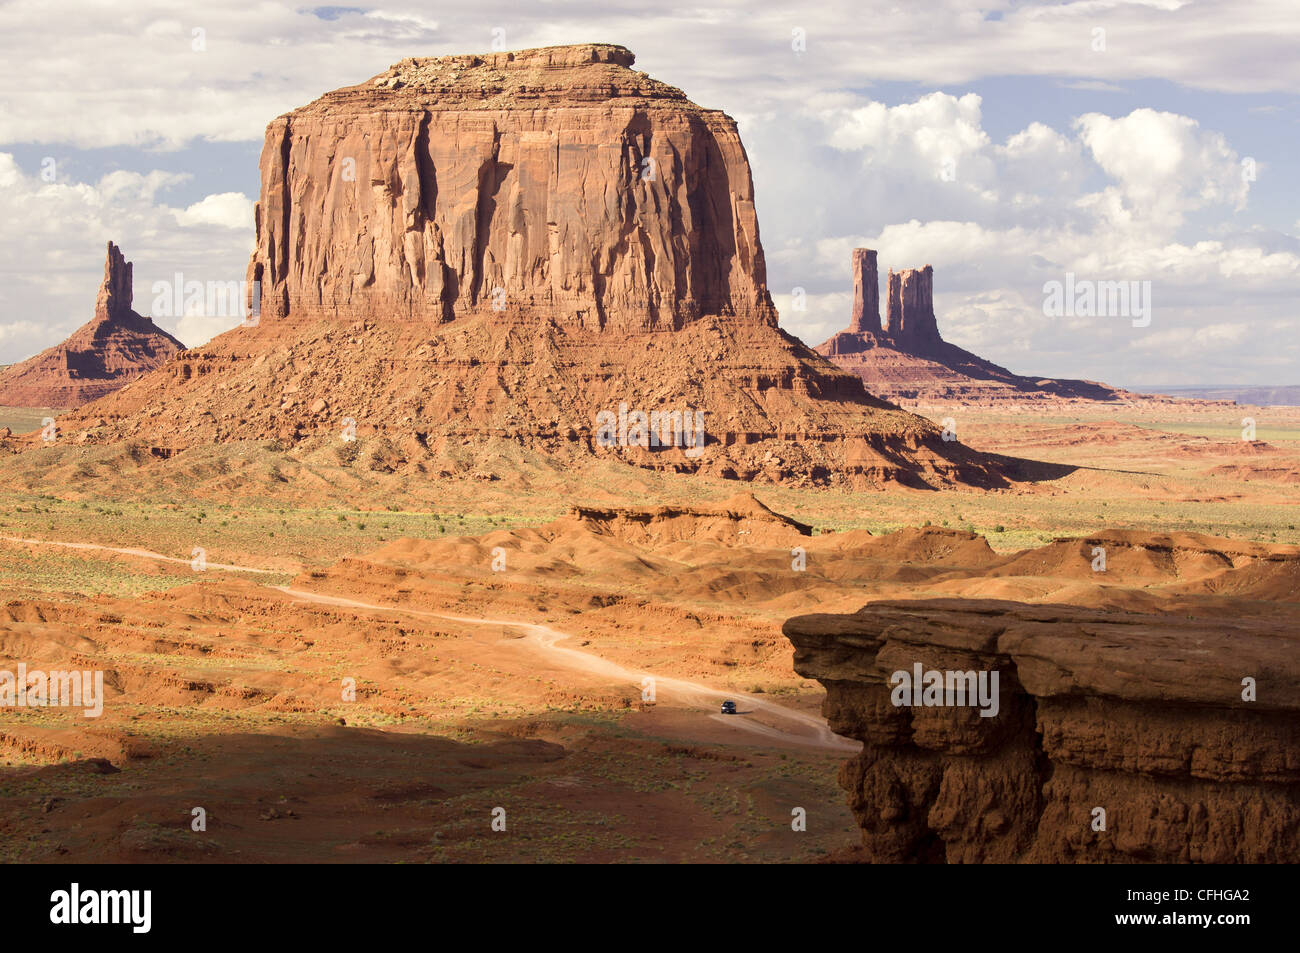 Monument Valley Tribal Park Mesas und buttes Stockfoto